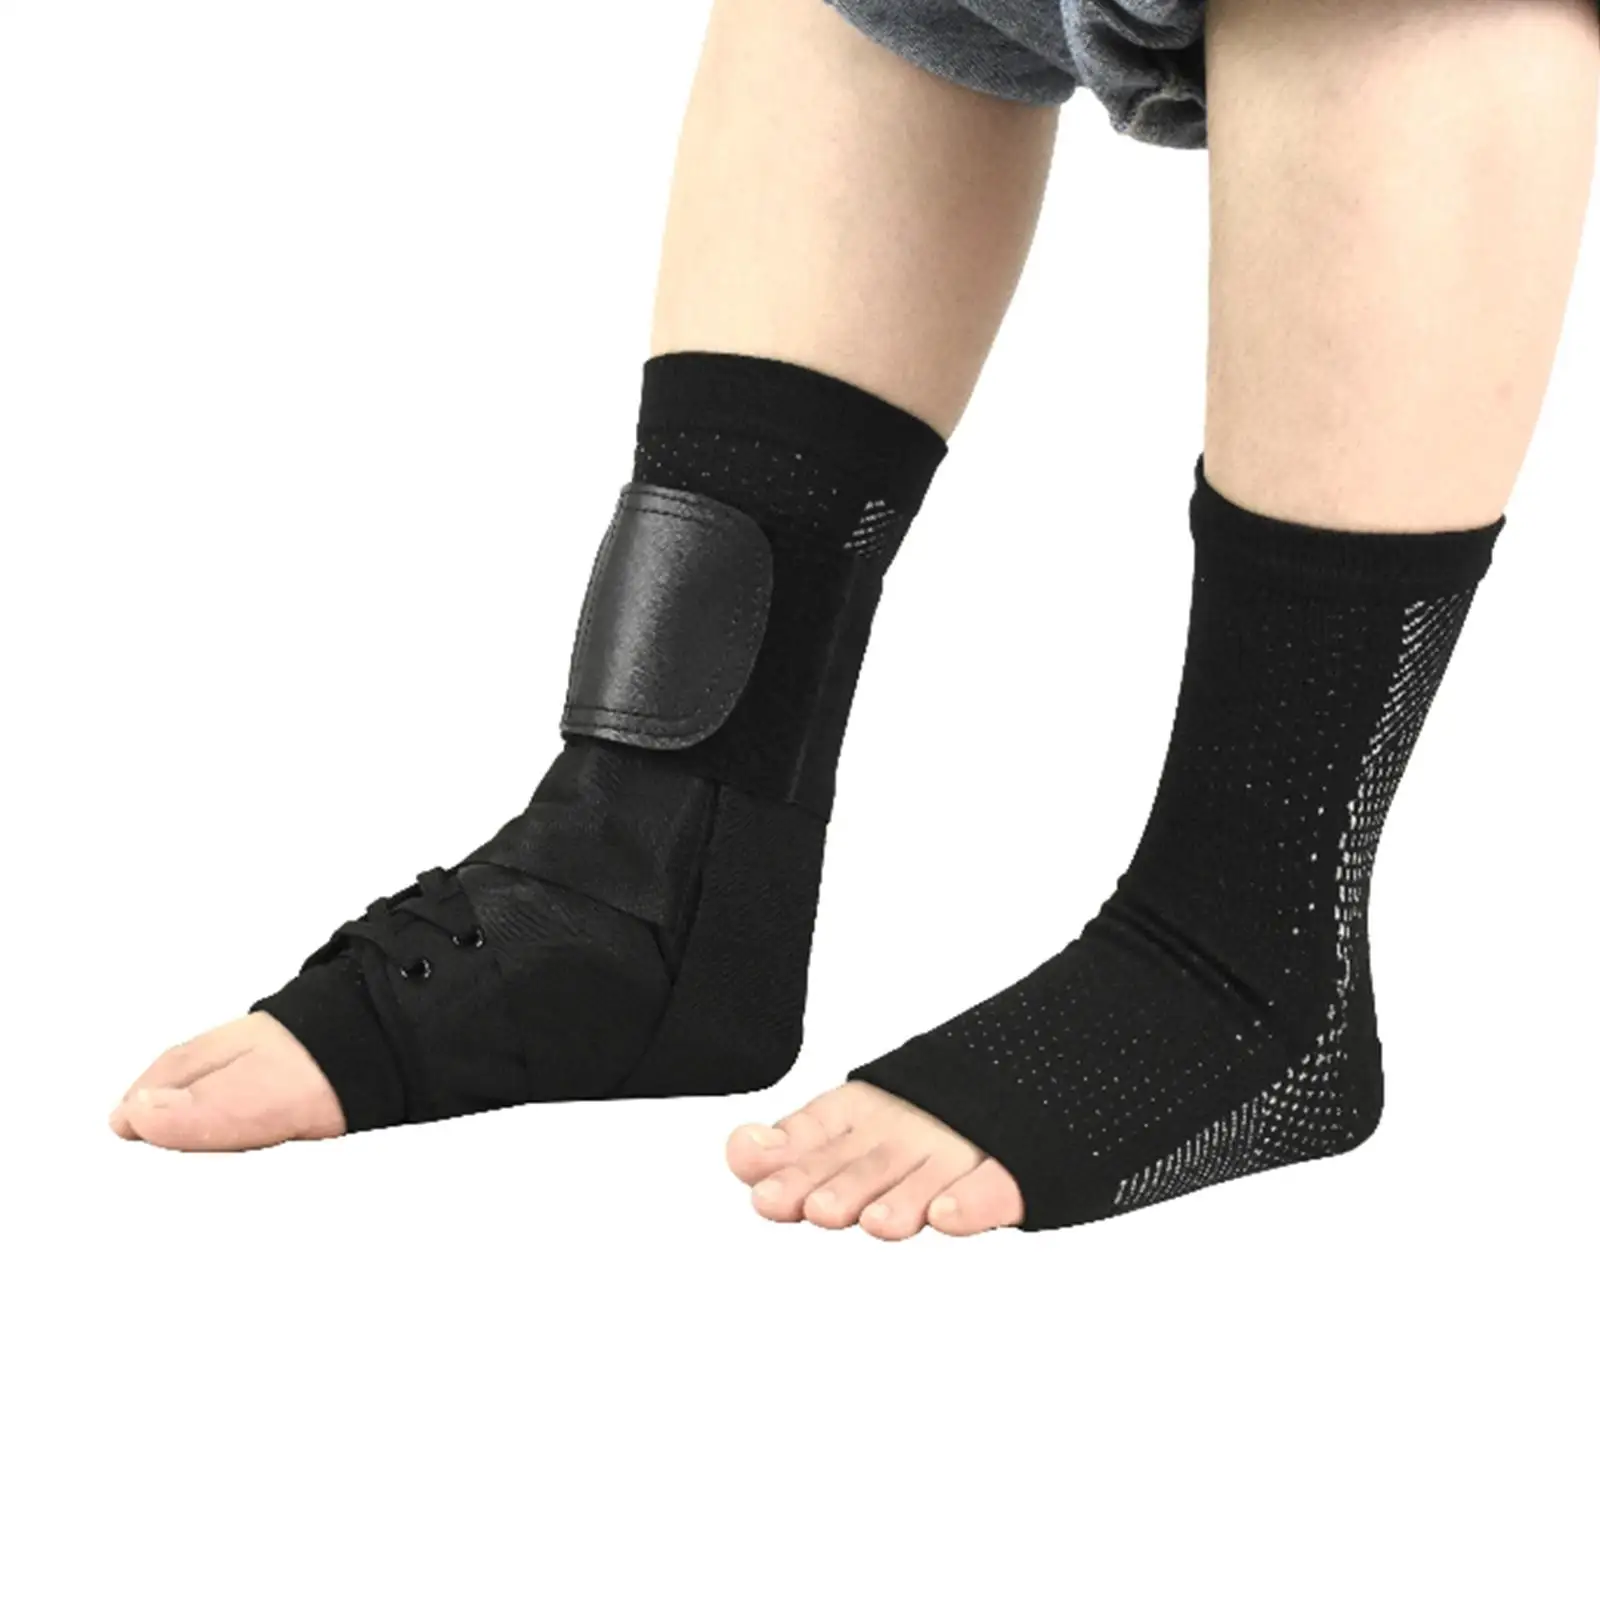 Ankle Support Brace Compression Socks Sleeve for Adults Pain Foot Heel Protection for Gym Competition Sports Riding Volleyball